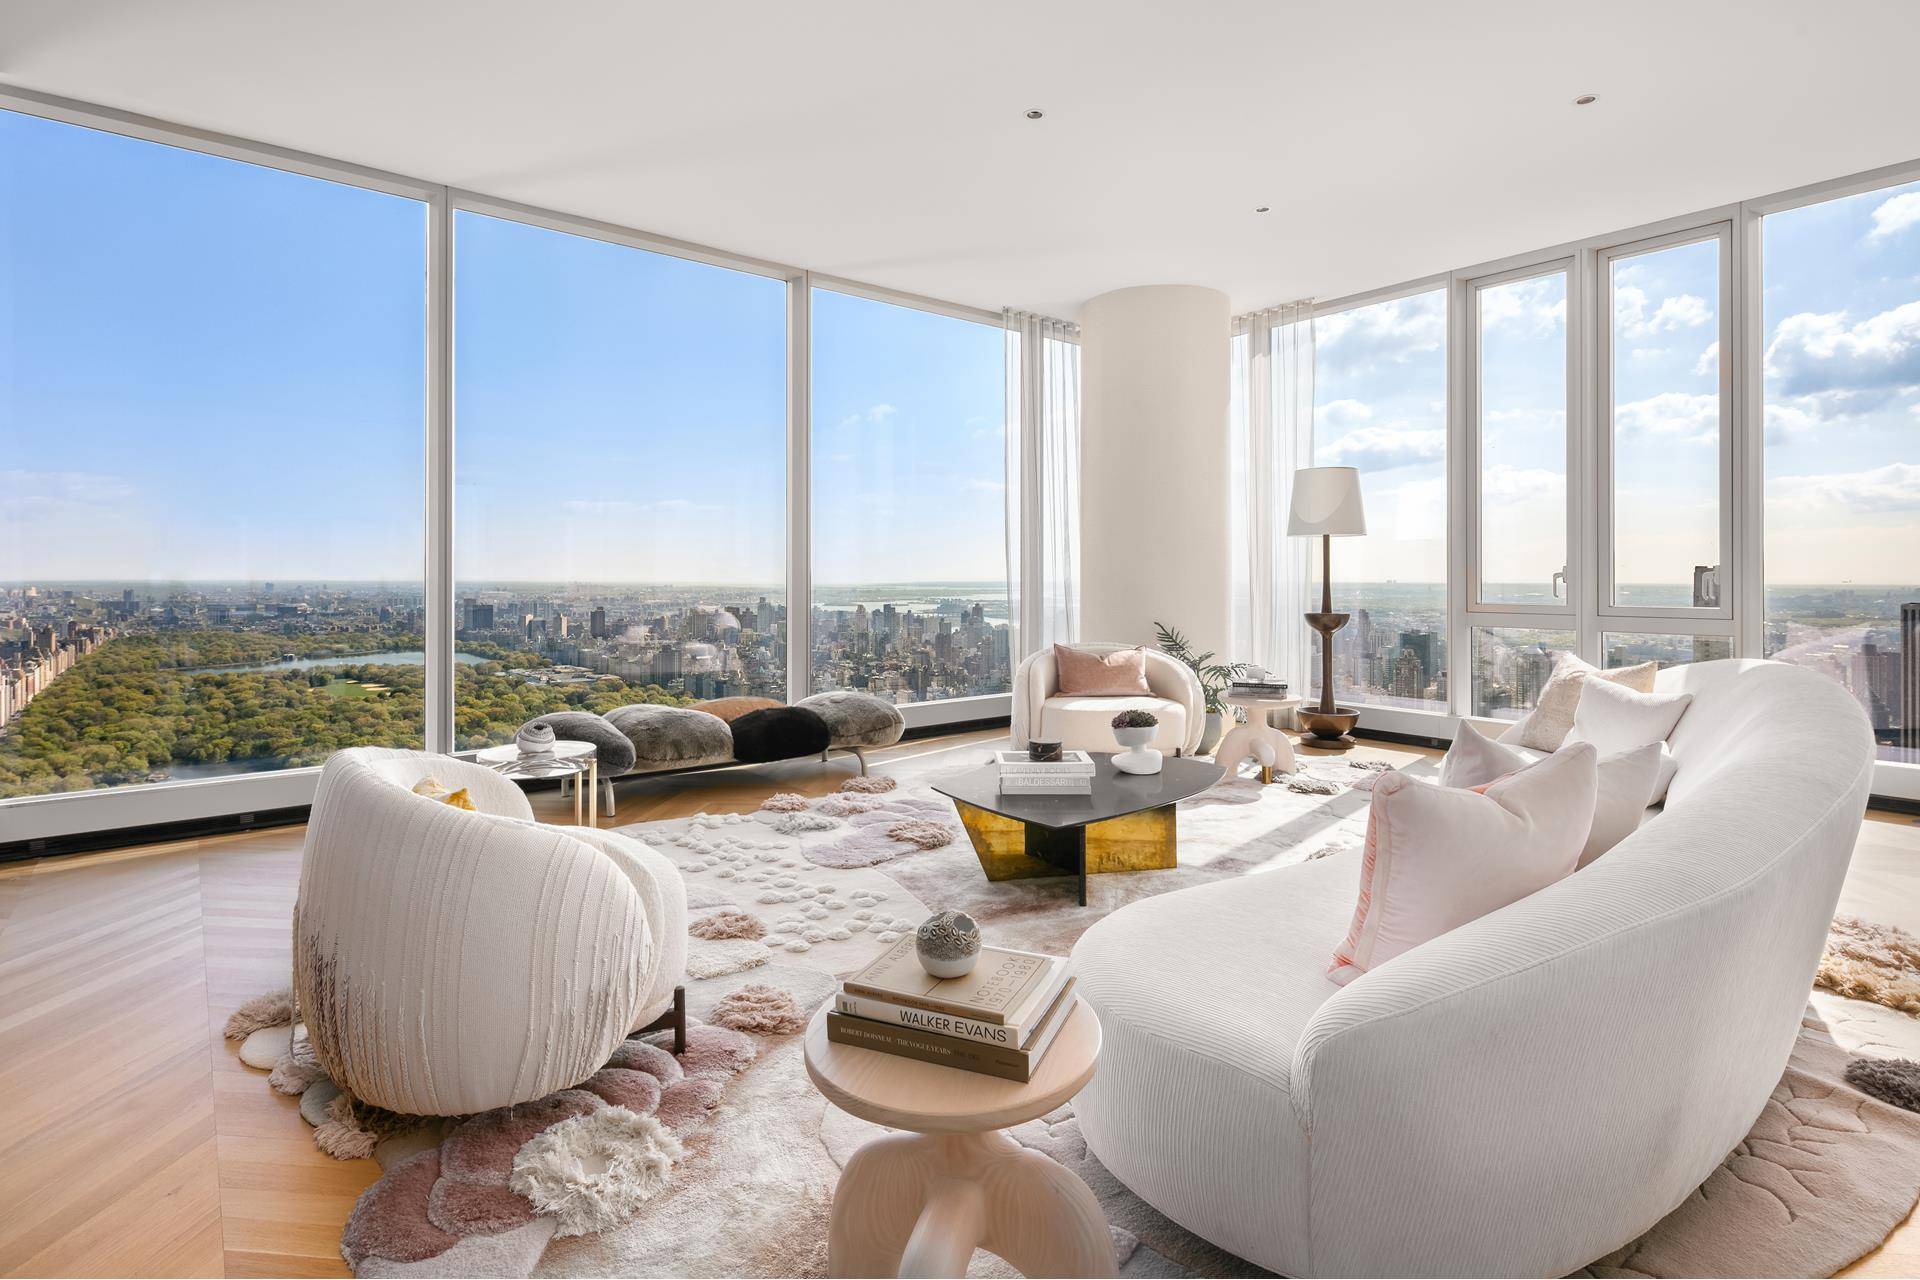 Soaring above the city, overlooking magnificent views of the NYC skyline and Central Park from the 69th floor, rests this ultra luxurious 3 bedroom, 3 and a half bath residence ...